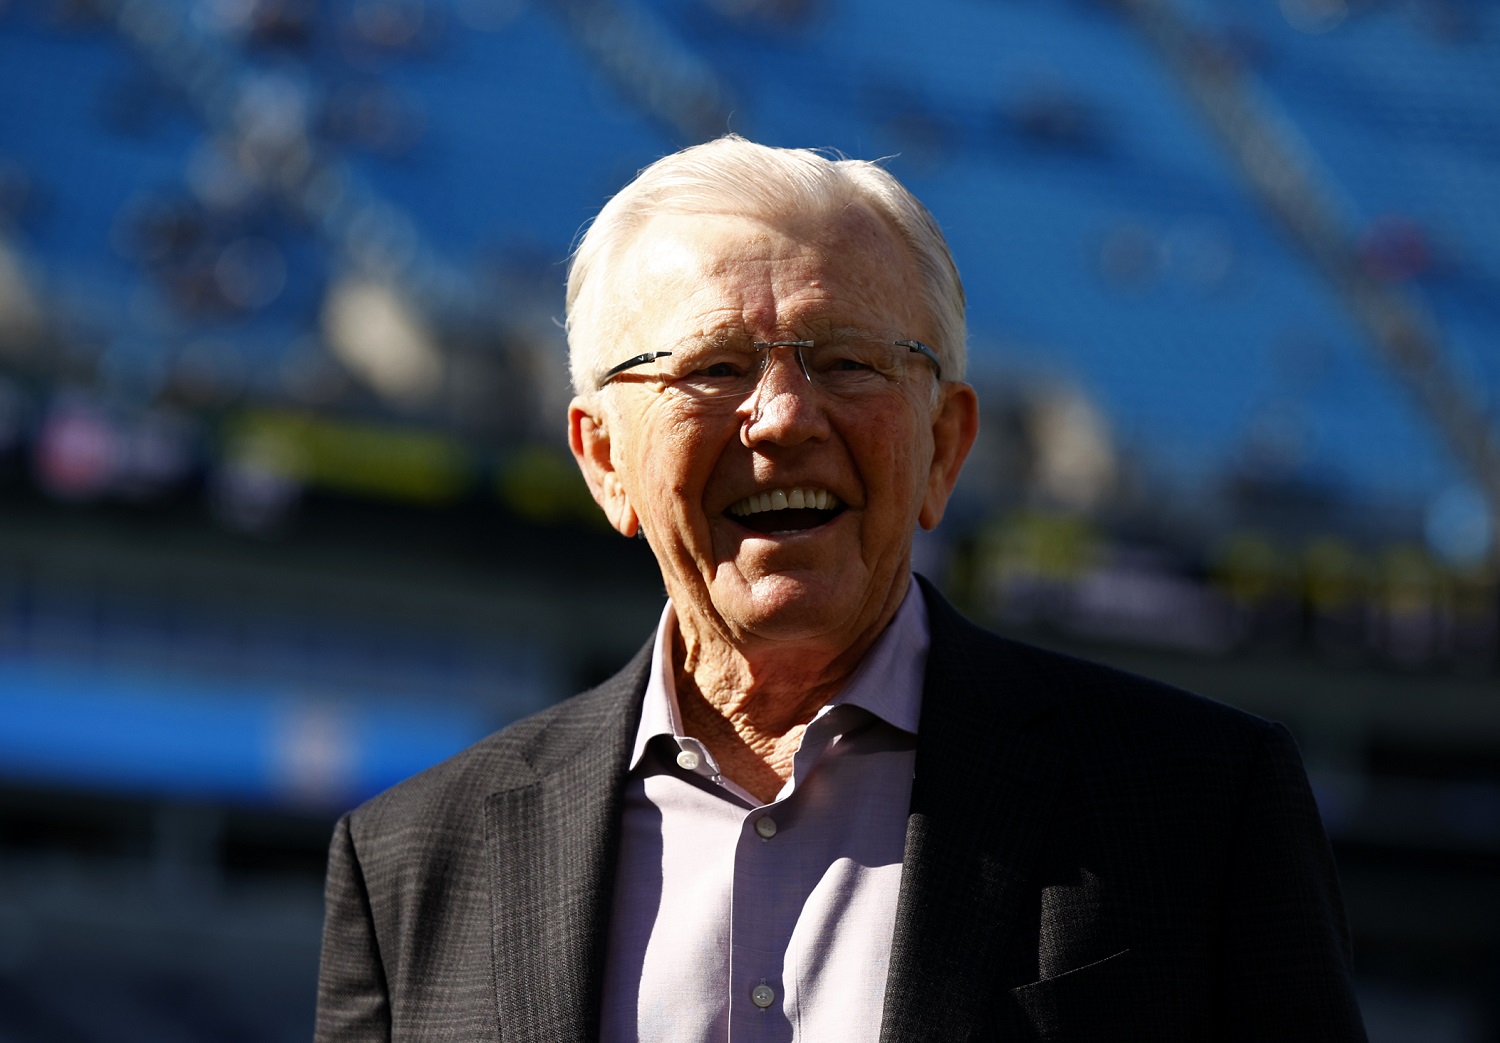 NASCAR owner and Hall of Famer Joe Gibbs looks on prior to the NFL game between the Carolina Panthers and the Atlanta Falcons at Bank of America Stadium on Dec. 12, 2021, in Charlotte, North Carolina.